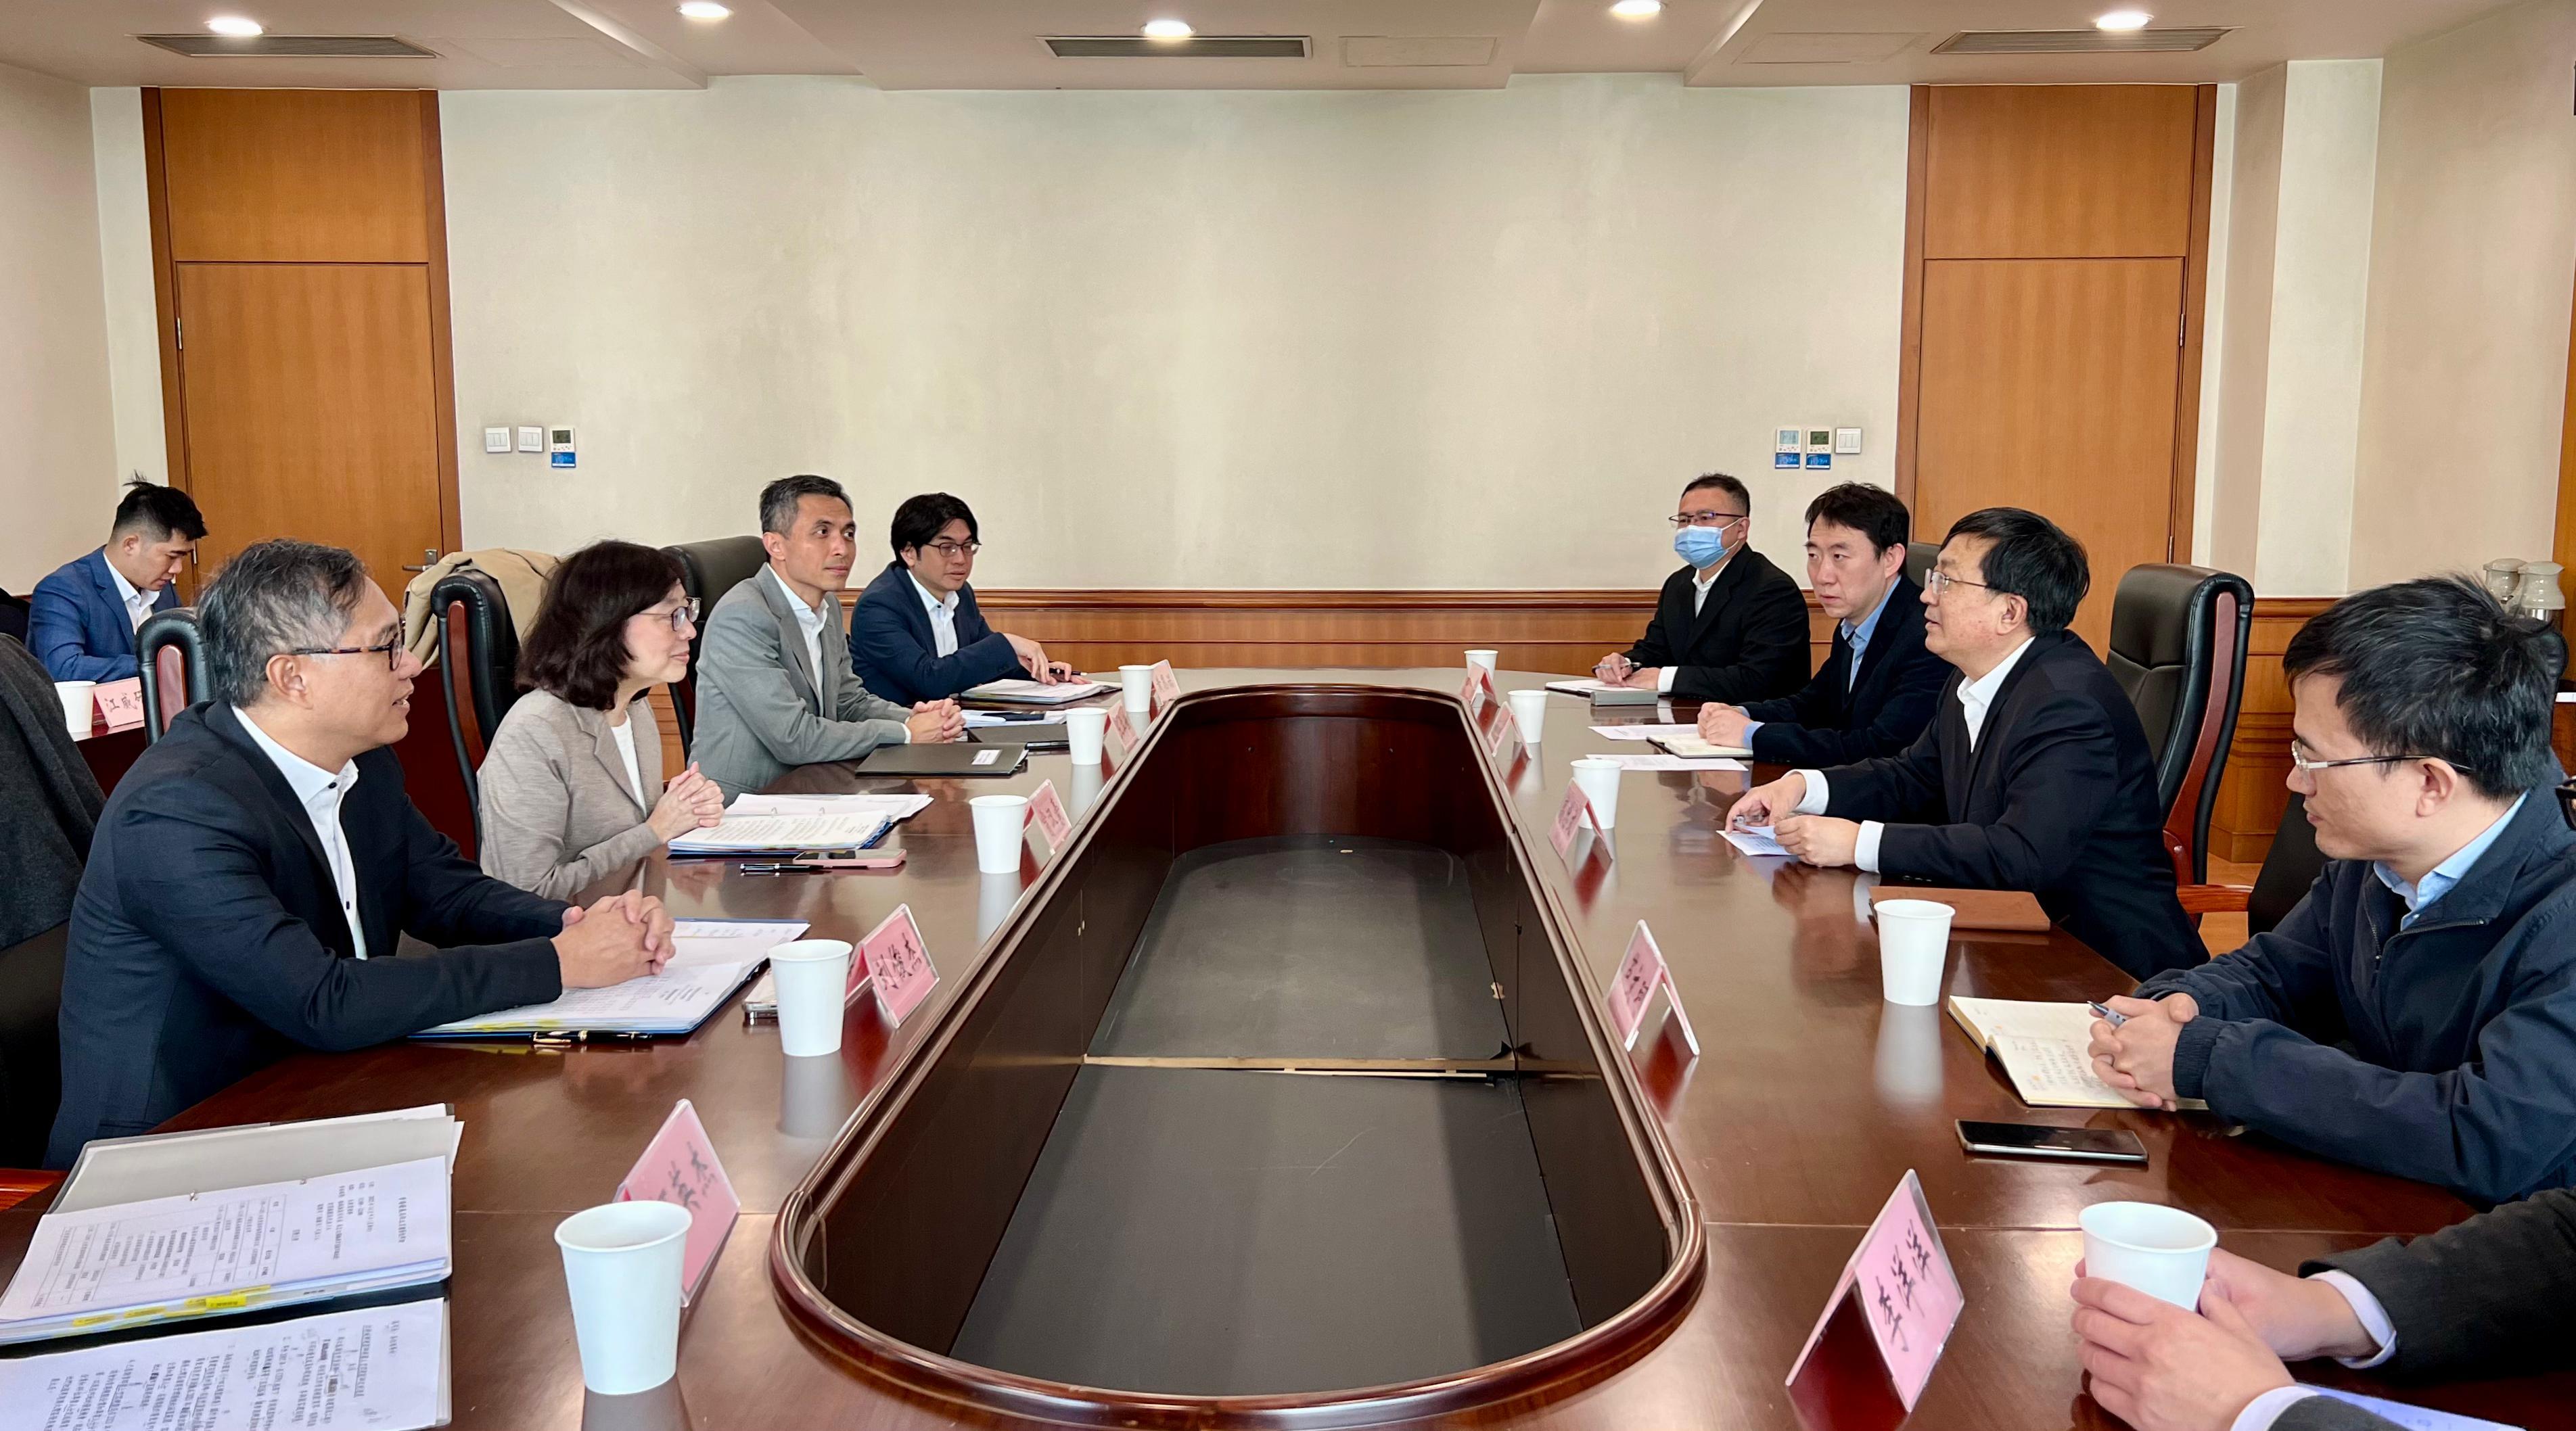 The Secretary for Development, Ms Bernadette Linn (second left), met with the Head of the Department of Sea Area and Island Management of the Ministry of Natural Resources, Mr Gao Zhongwen (second right), in Beijing today (November 9). The Permanent Secretary for Development (Works), Mr Ricky Lau (first left), and the Director of the Northern Metropolis Co-ordination Office, Mr Vic Yau (third left), also attended.